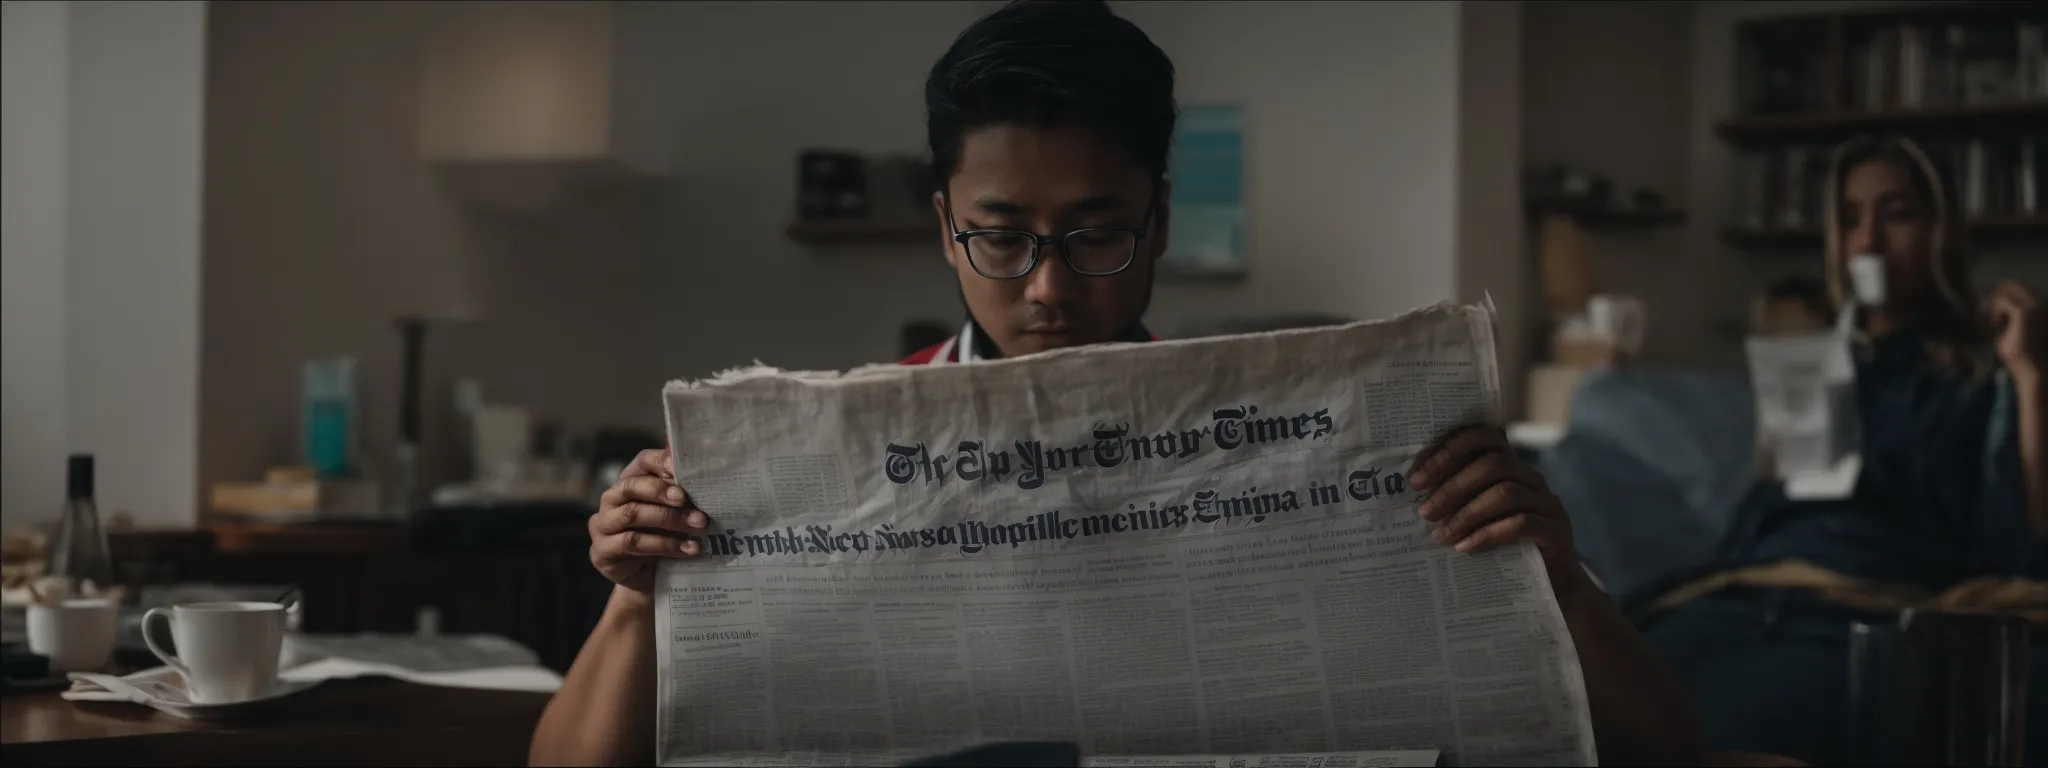 a person reading the new york times newspaper intently, with a clear view of the prominent, well-crafted headlines.